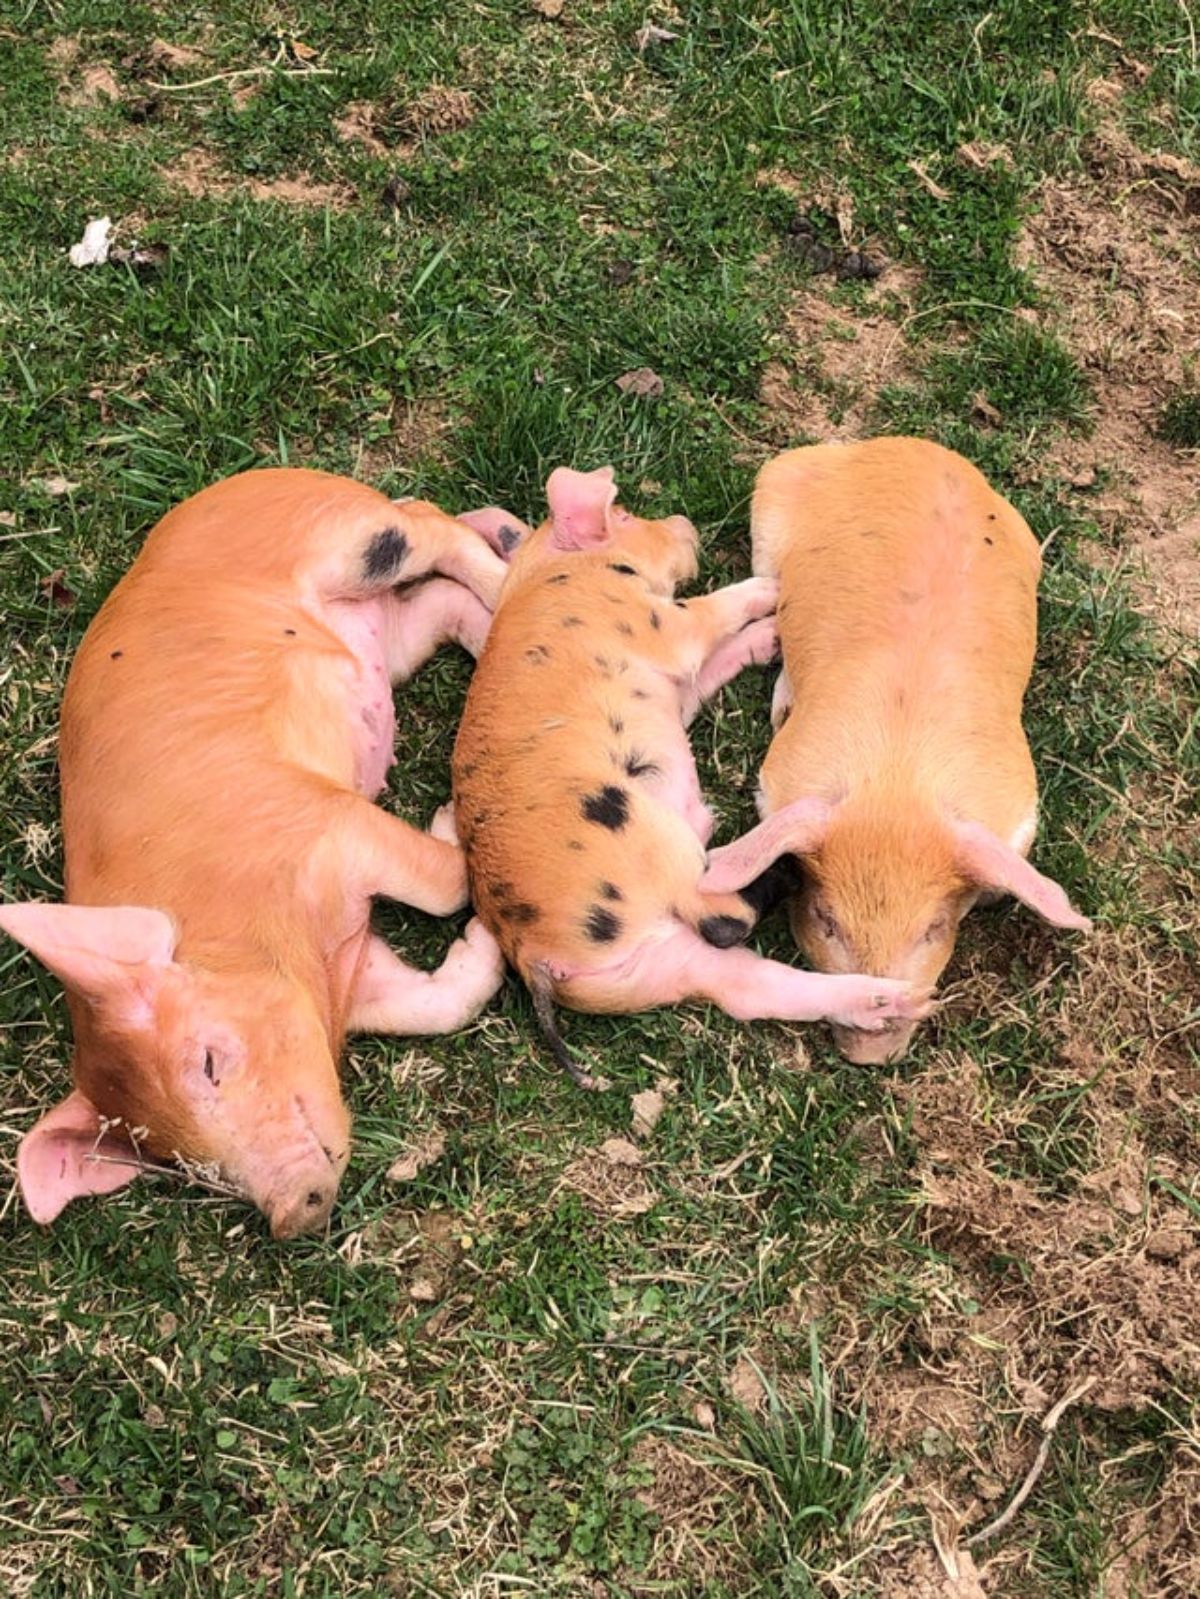 1 large brown pig and a smaller brown and black pig and medium-sized brown pig laying on the grass in a row